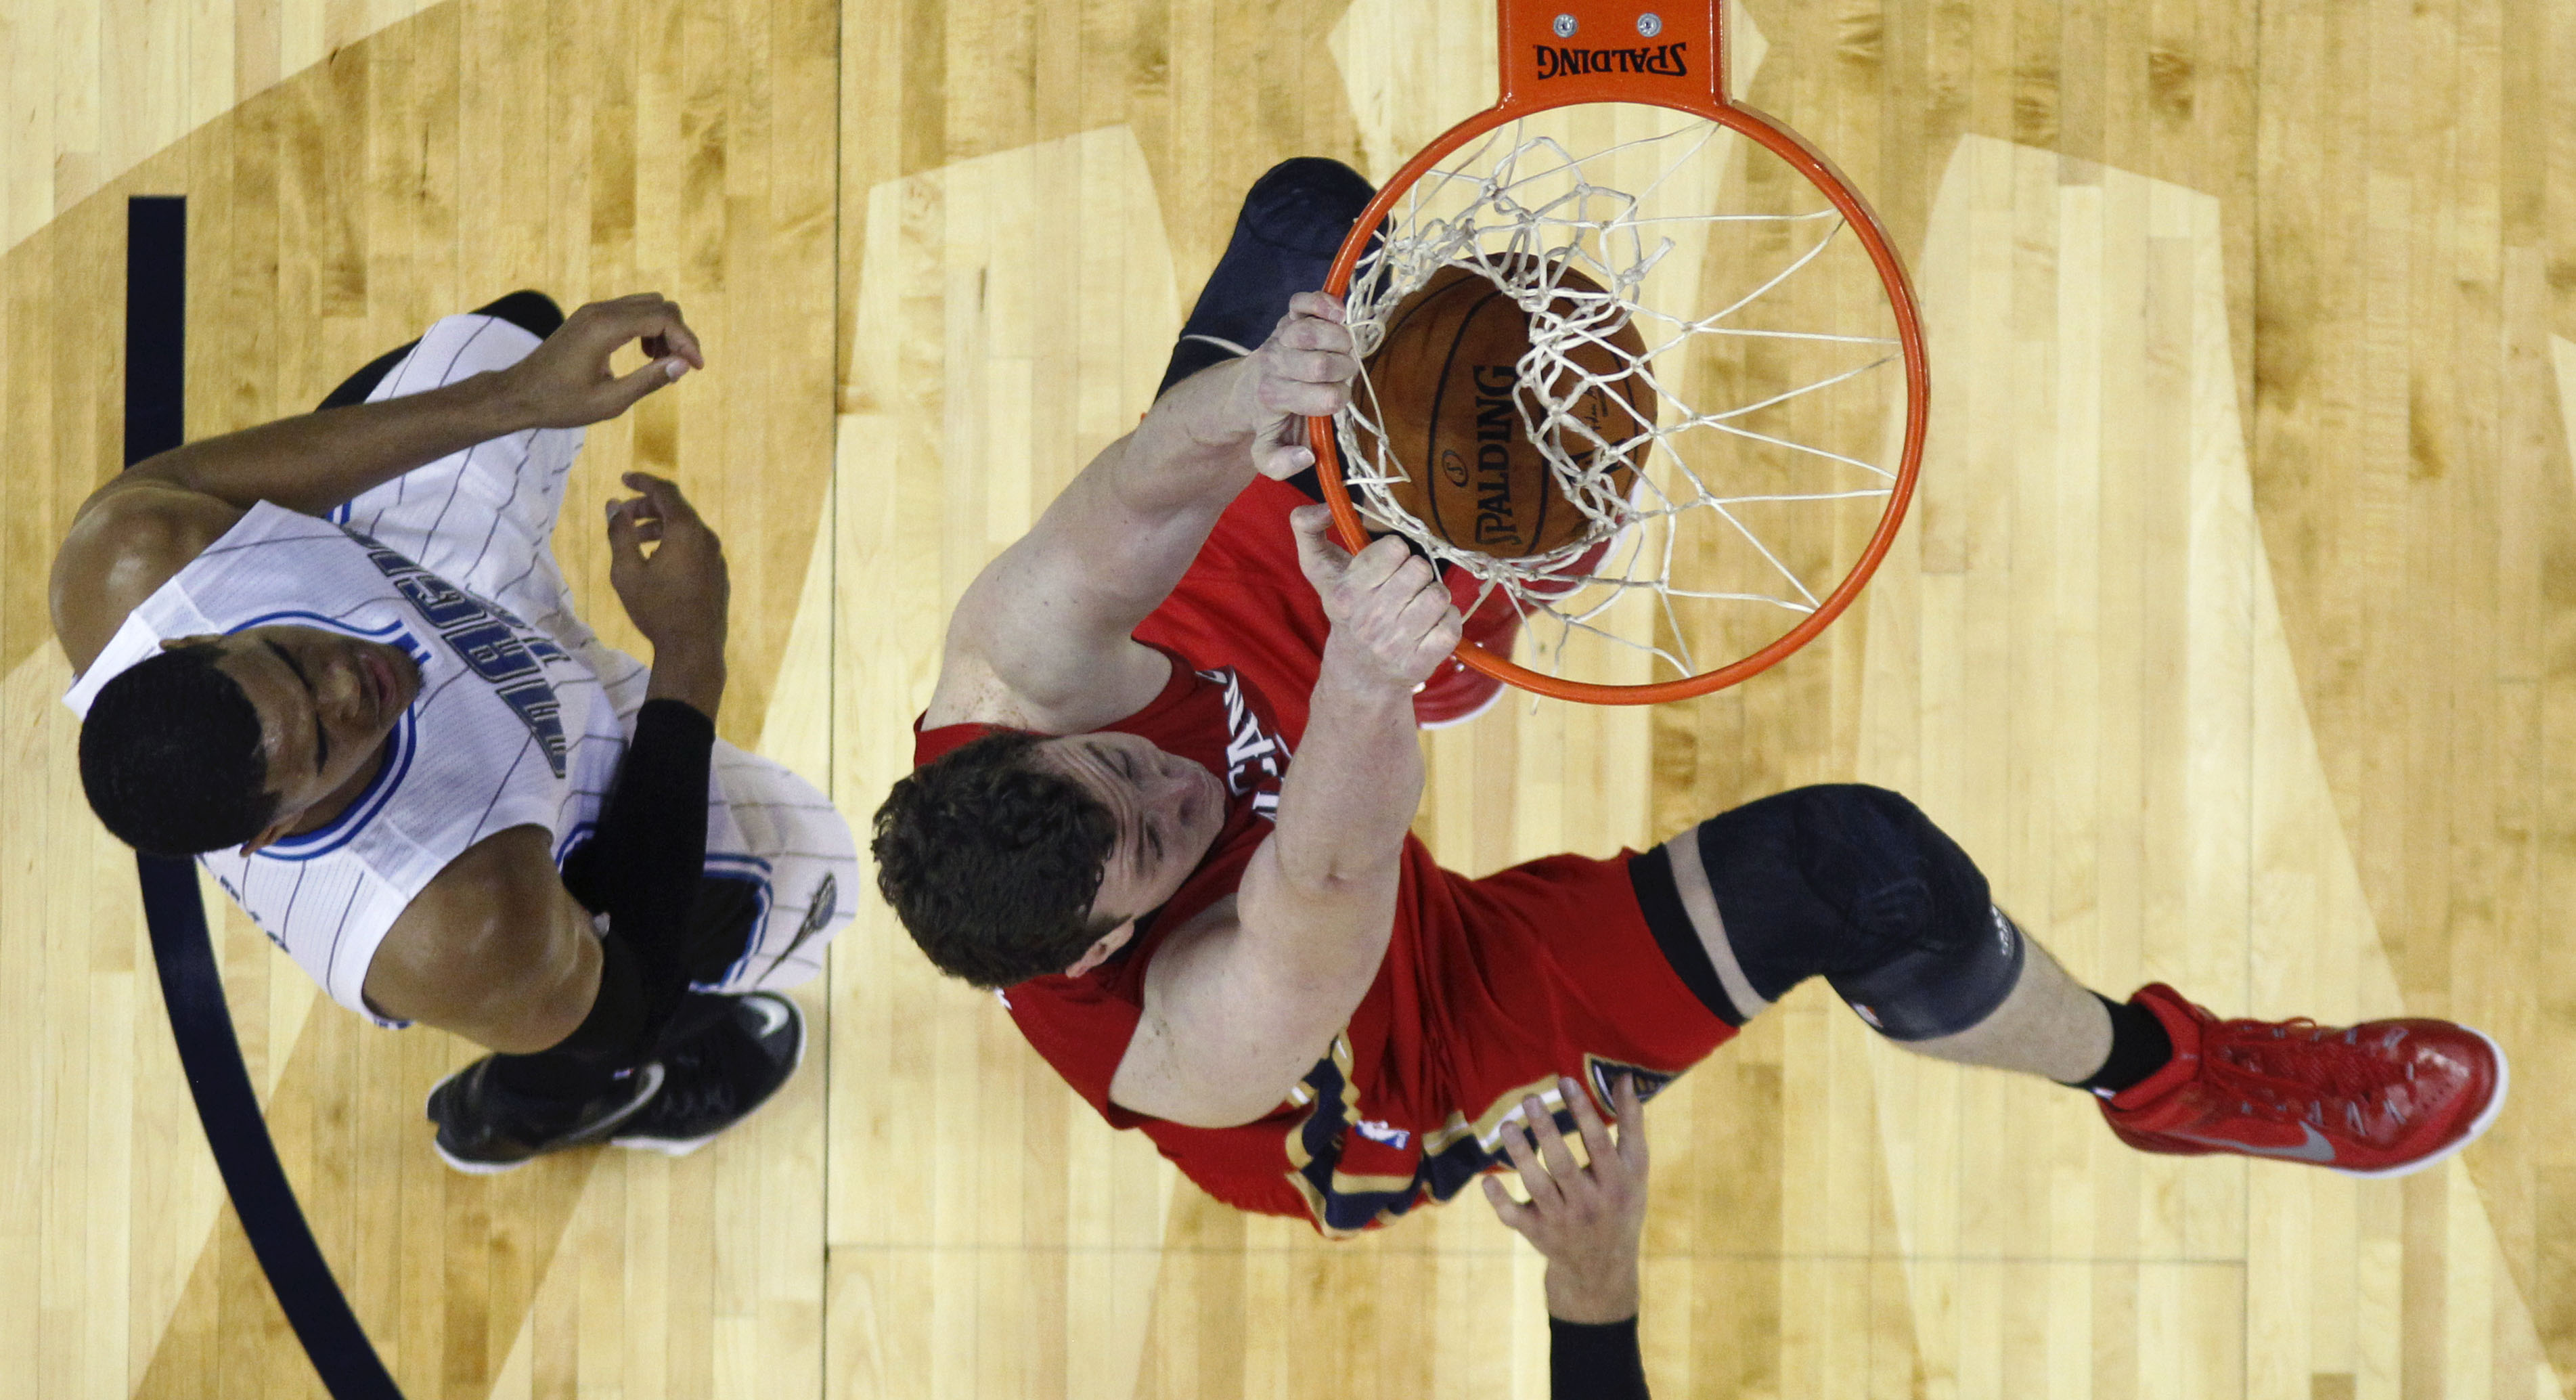 New Orleans Pelicans center Omer Asik slam dunks over Orlando Magic forward Tobias Harris, left,  in the first half of an NBA basketball game in New Orleans, Tuesday, Oct. 28, 2014. (AP Photo/Gerald Herbert)